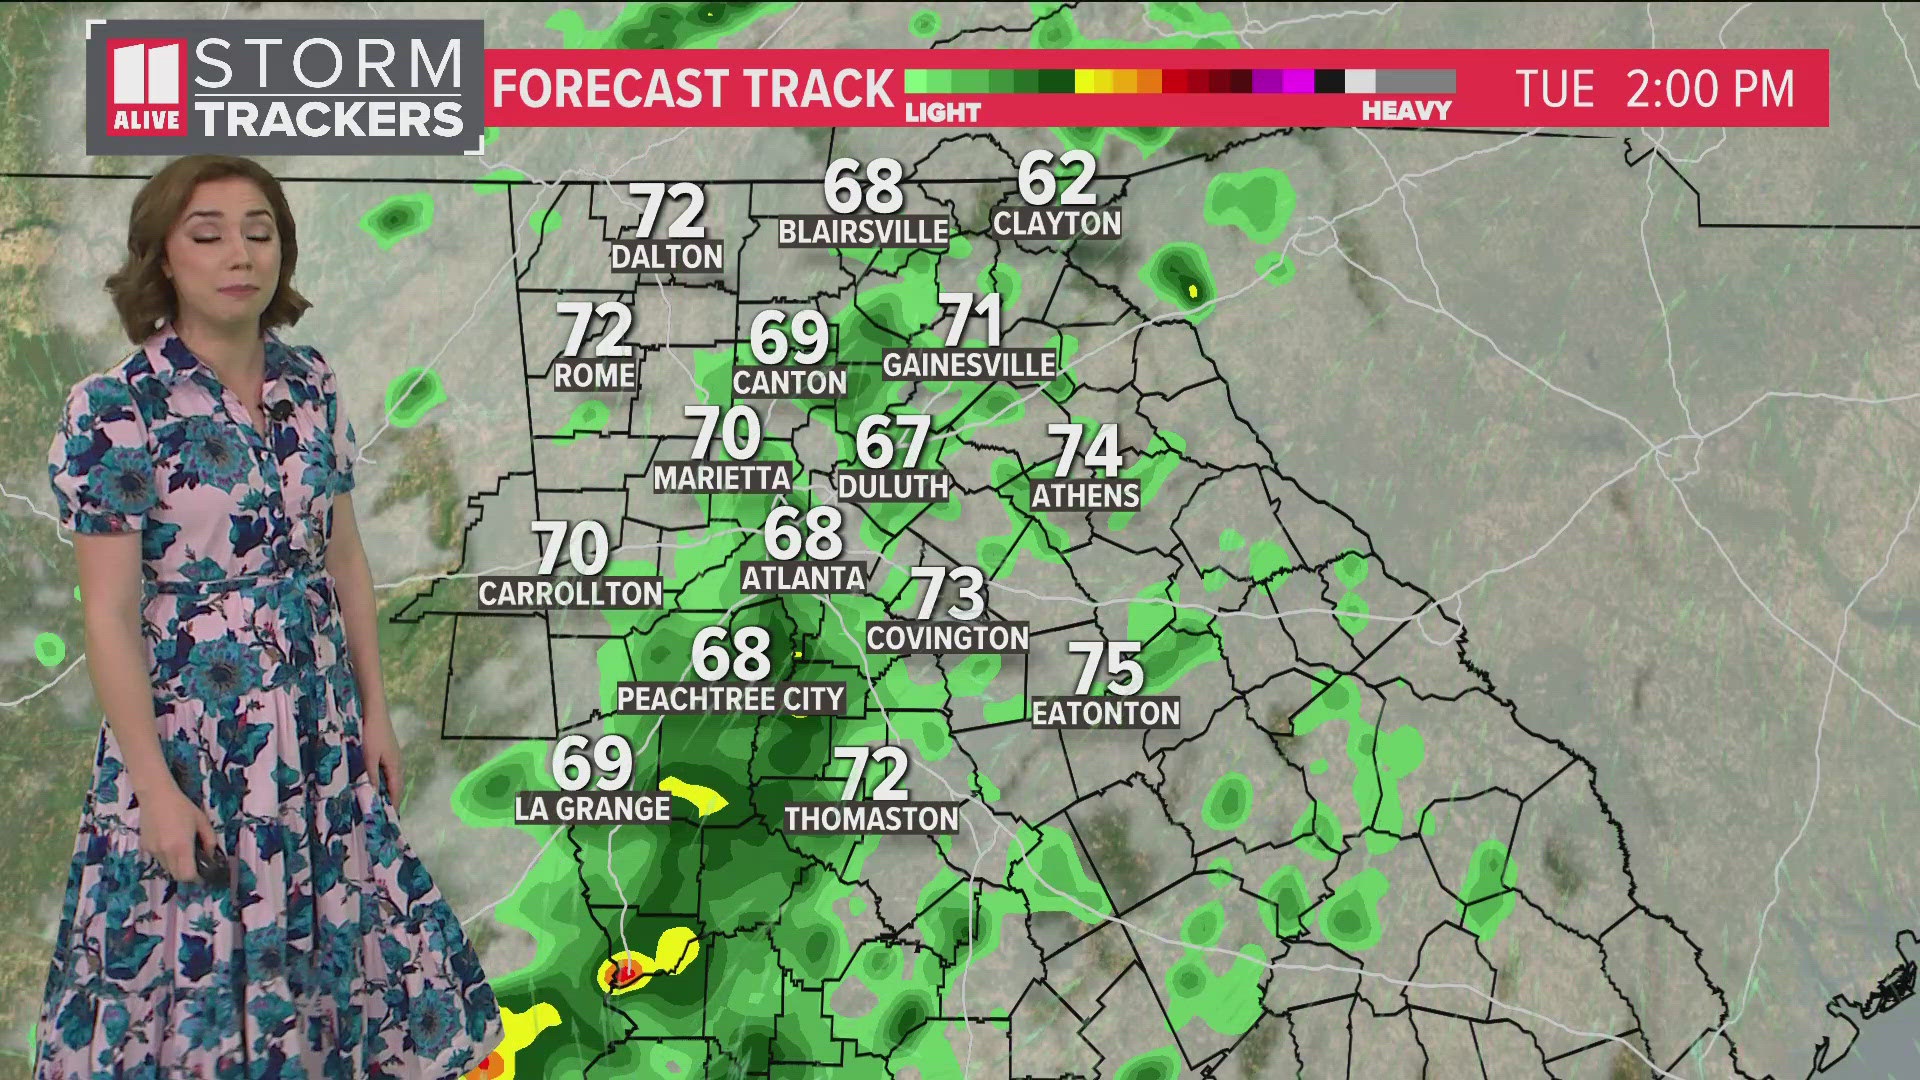 Scattered showers and a few storms return Tuesday